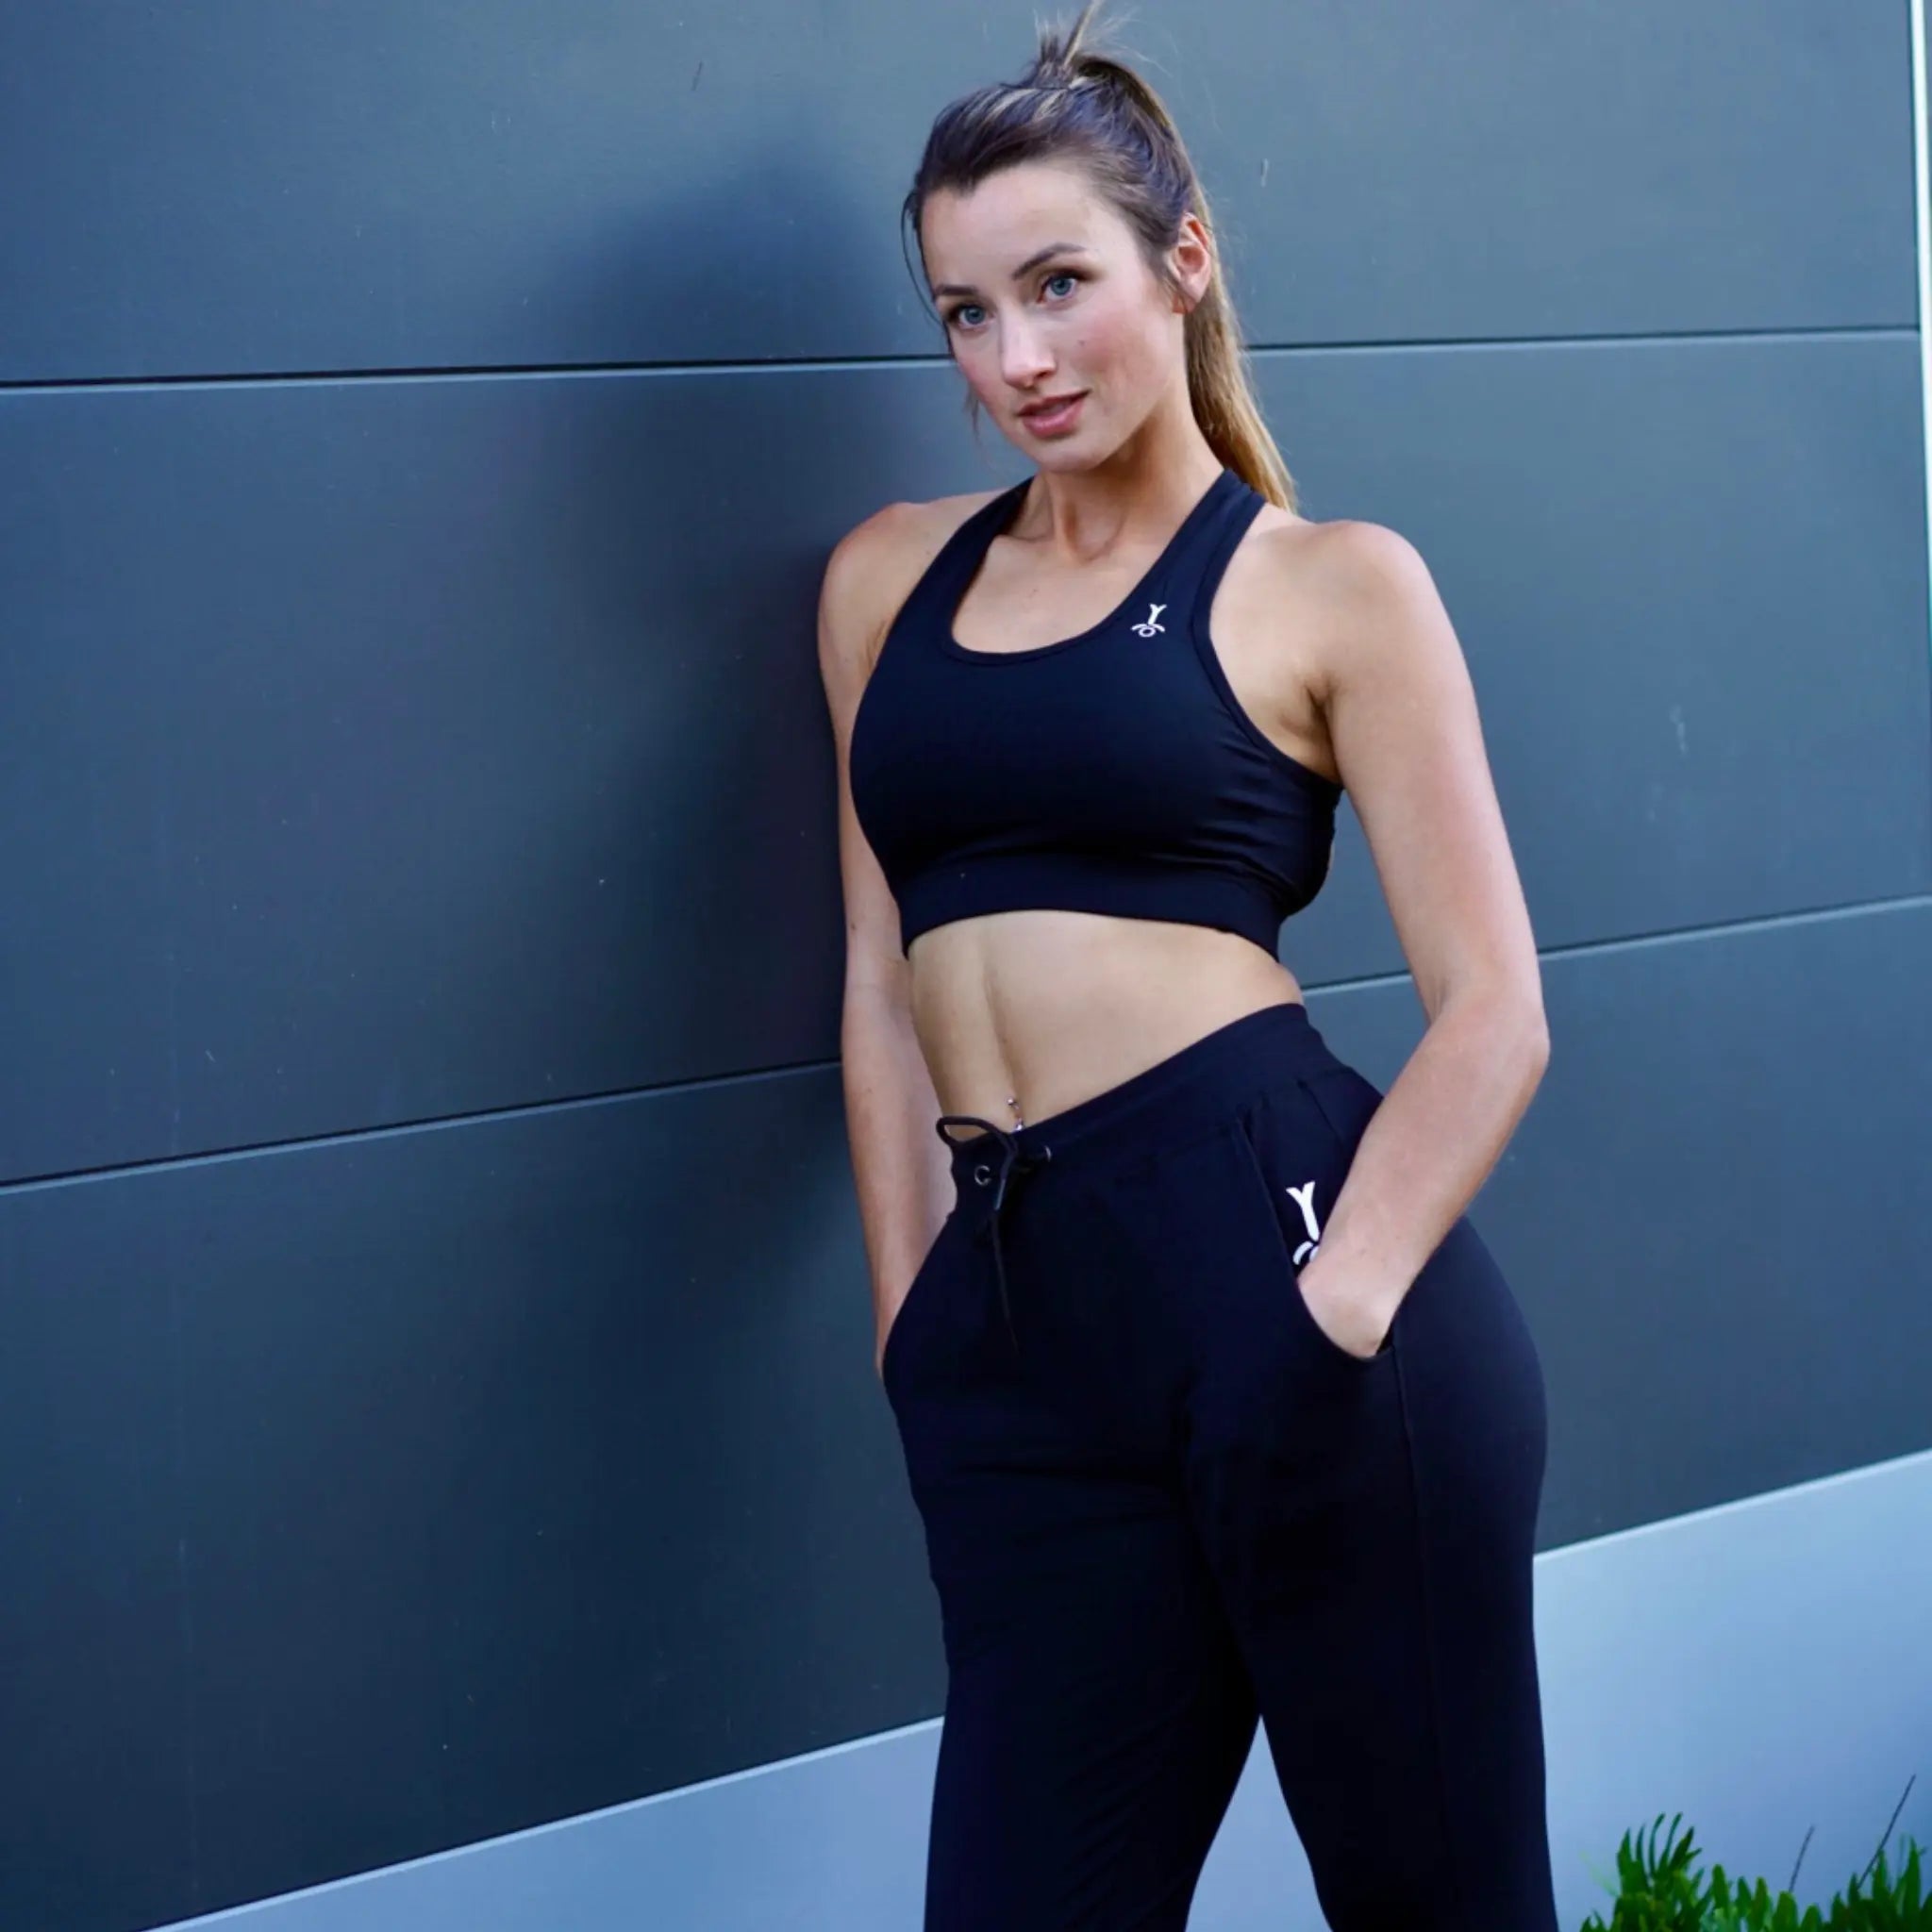 Our Vitality Sports Bra has a premium buttery smooth fabric. 